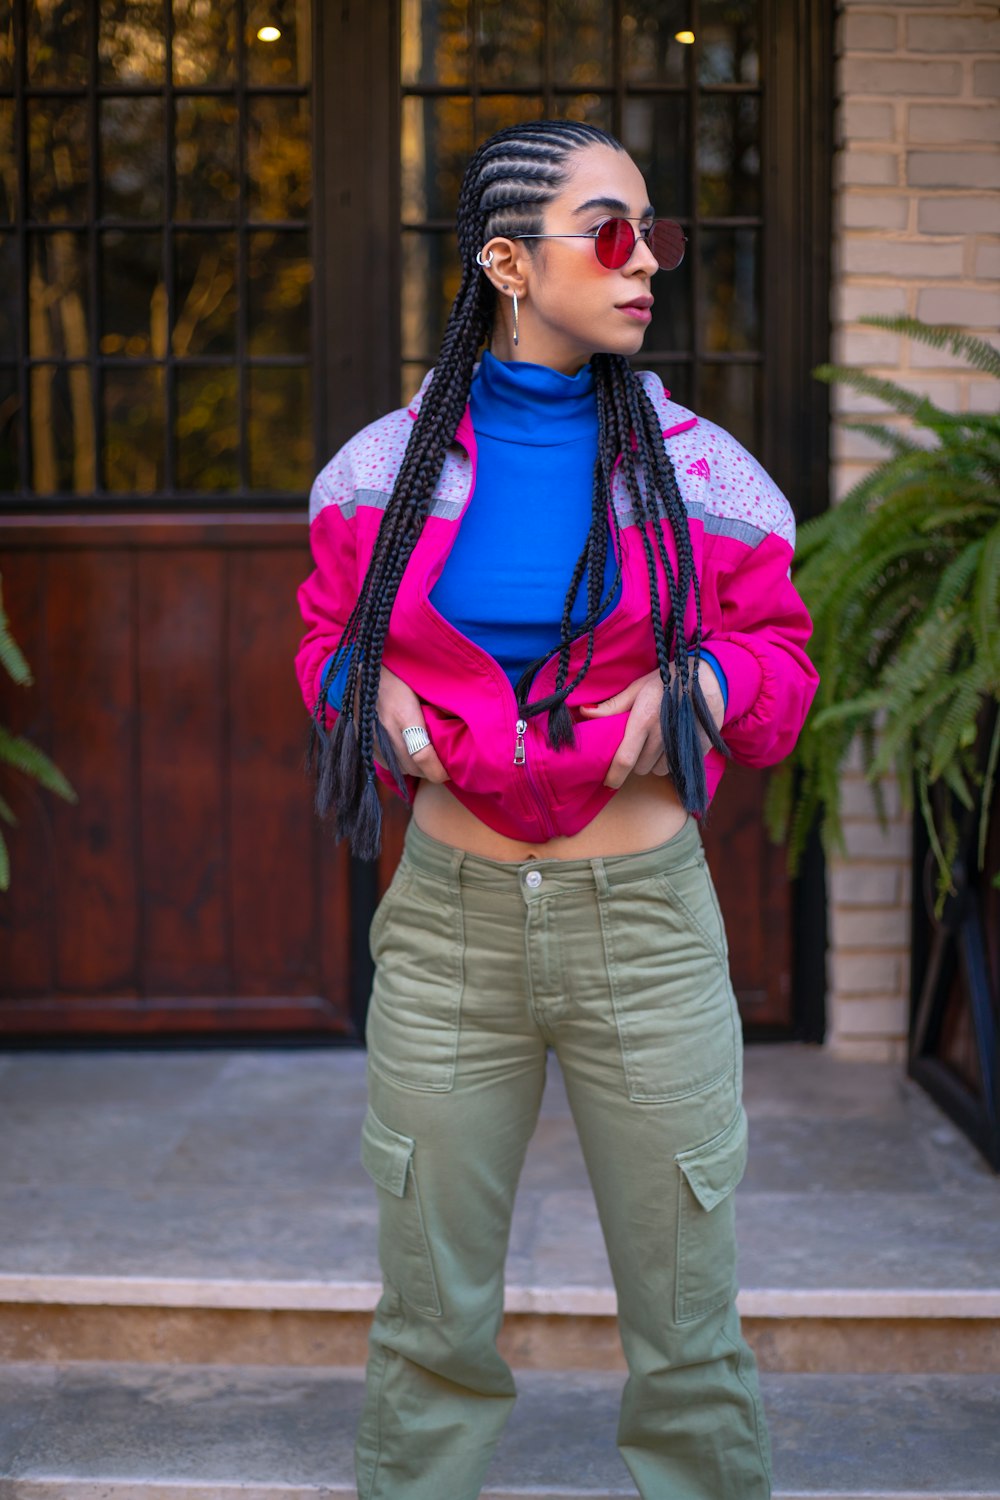 a woman with dreadlocks wearing a pink jacket and green pants